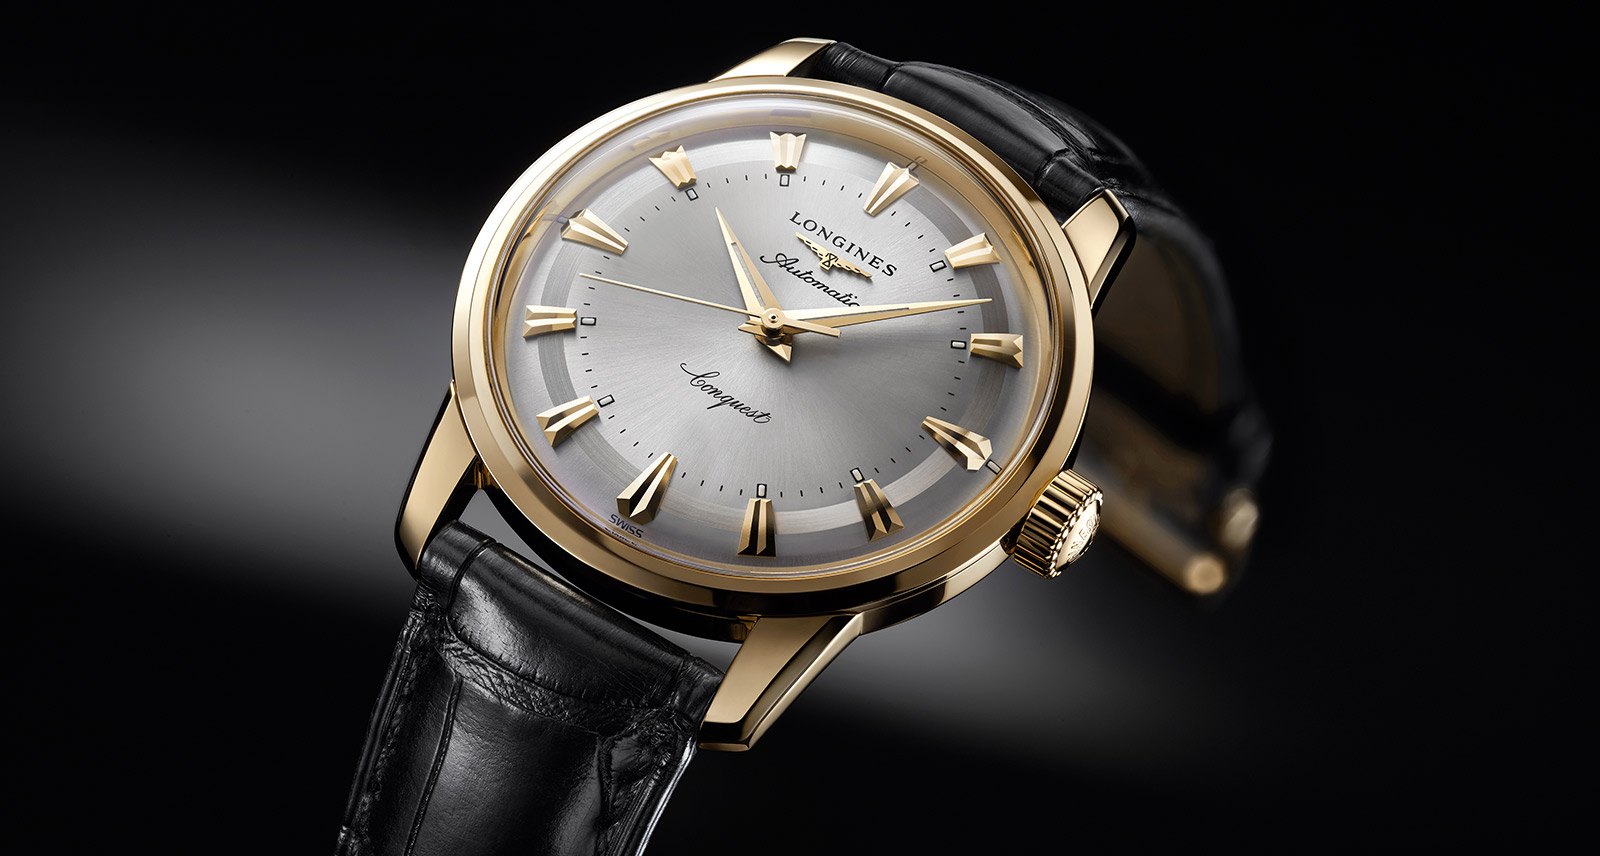 The Longines Heritage Watches We're Drooling Over